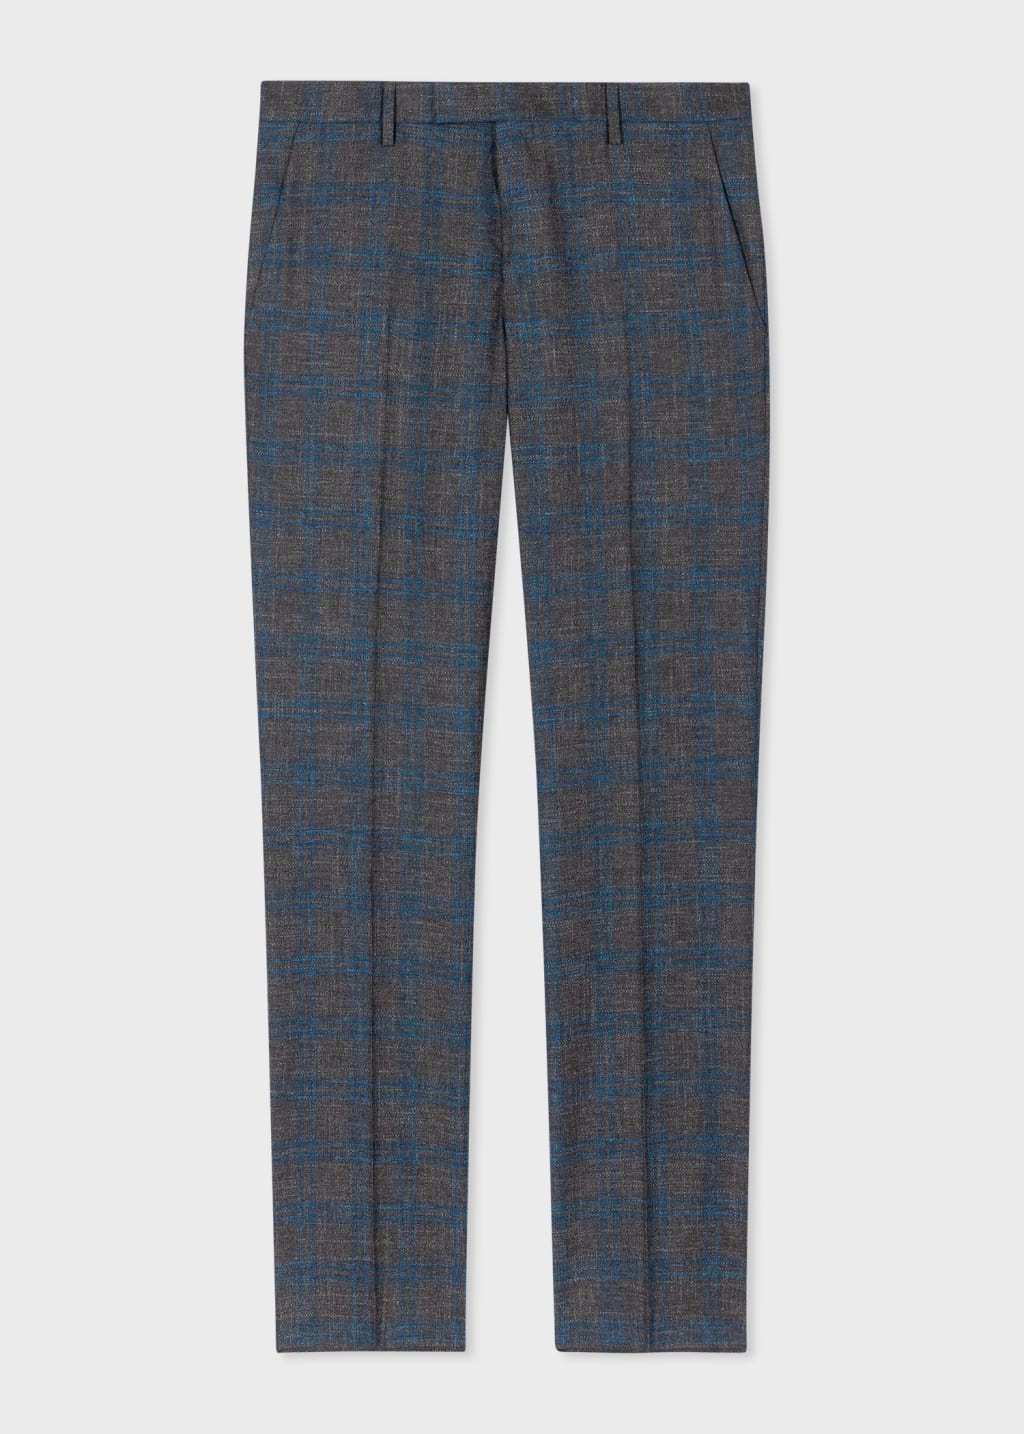 Product View - Grey and Blue Check Wool-Linen Suit by Paul Smith